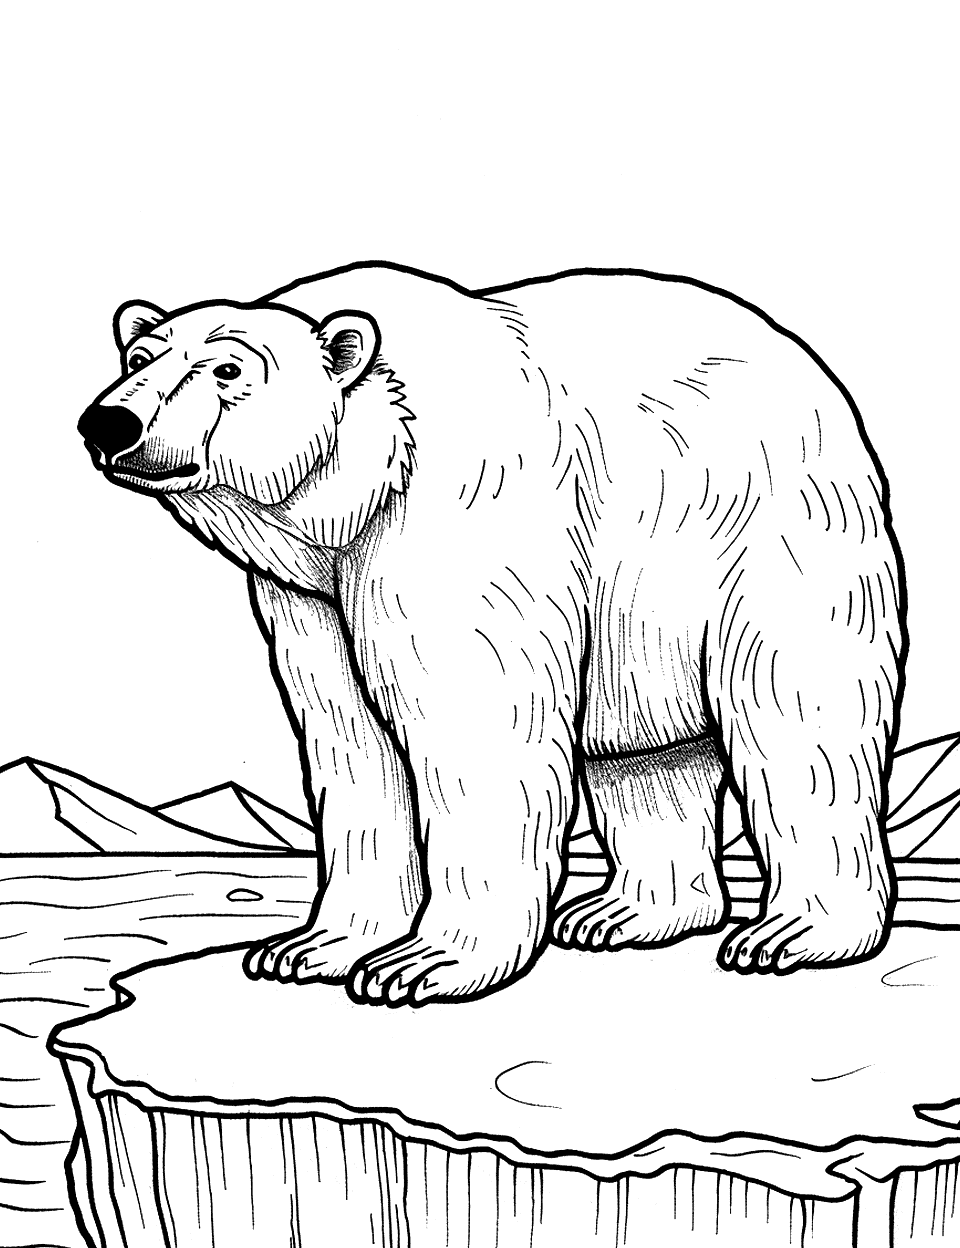 Polar Bear on a Glacier Coloring Page - A polar bear standing majestically on a glacier overlooking the ocean.